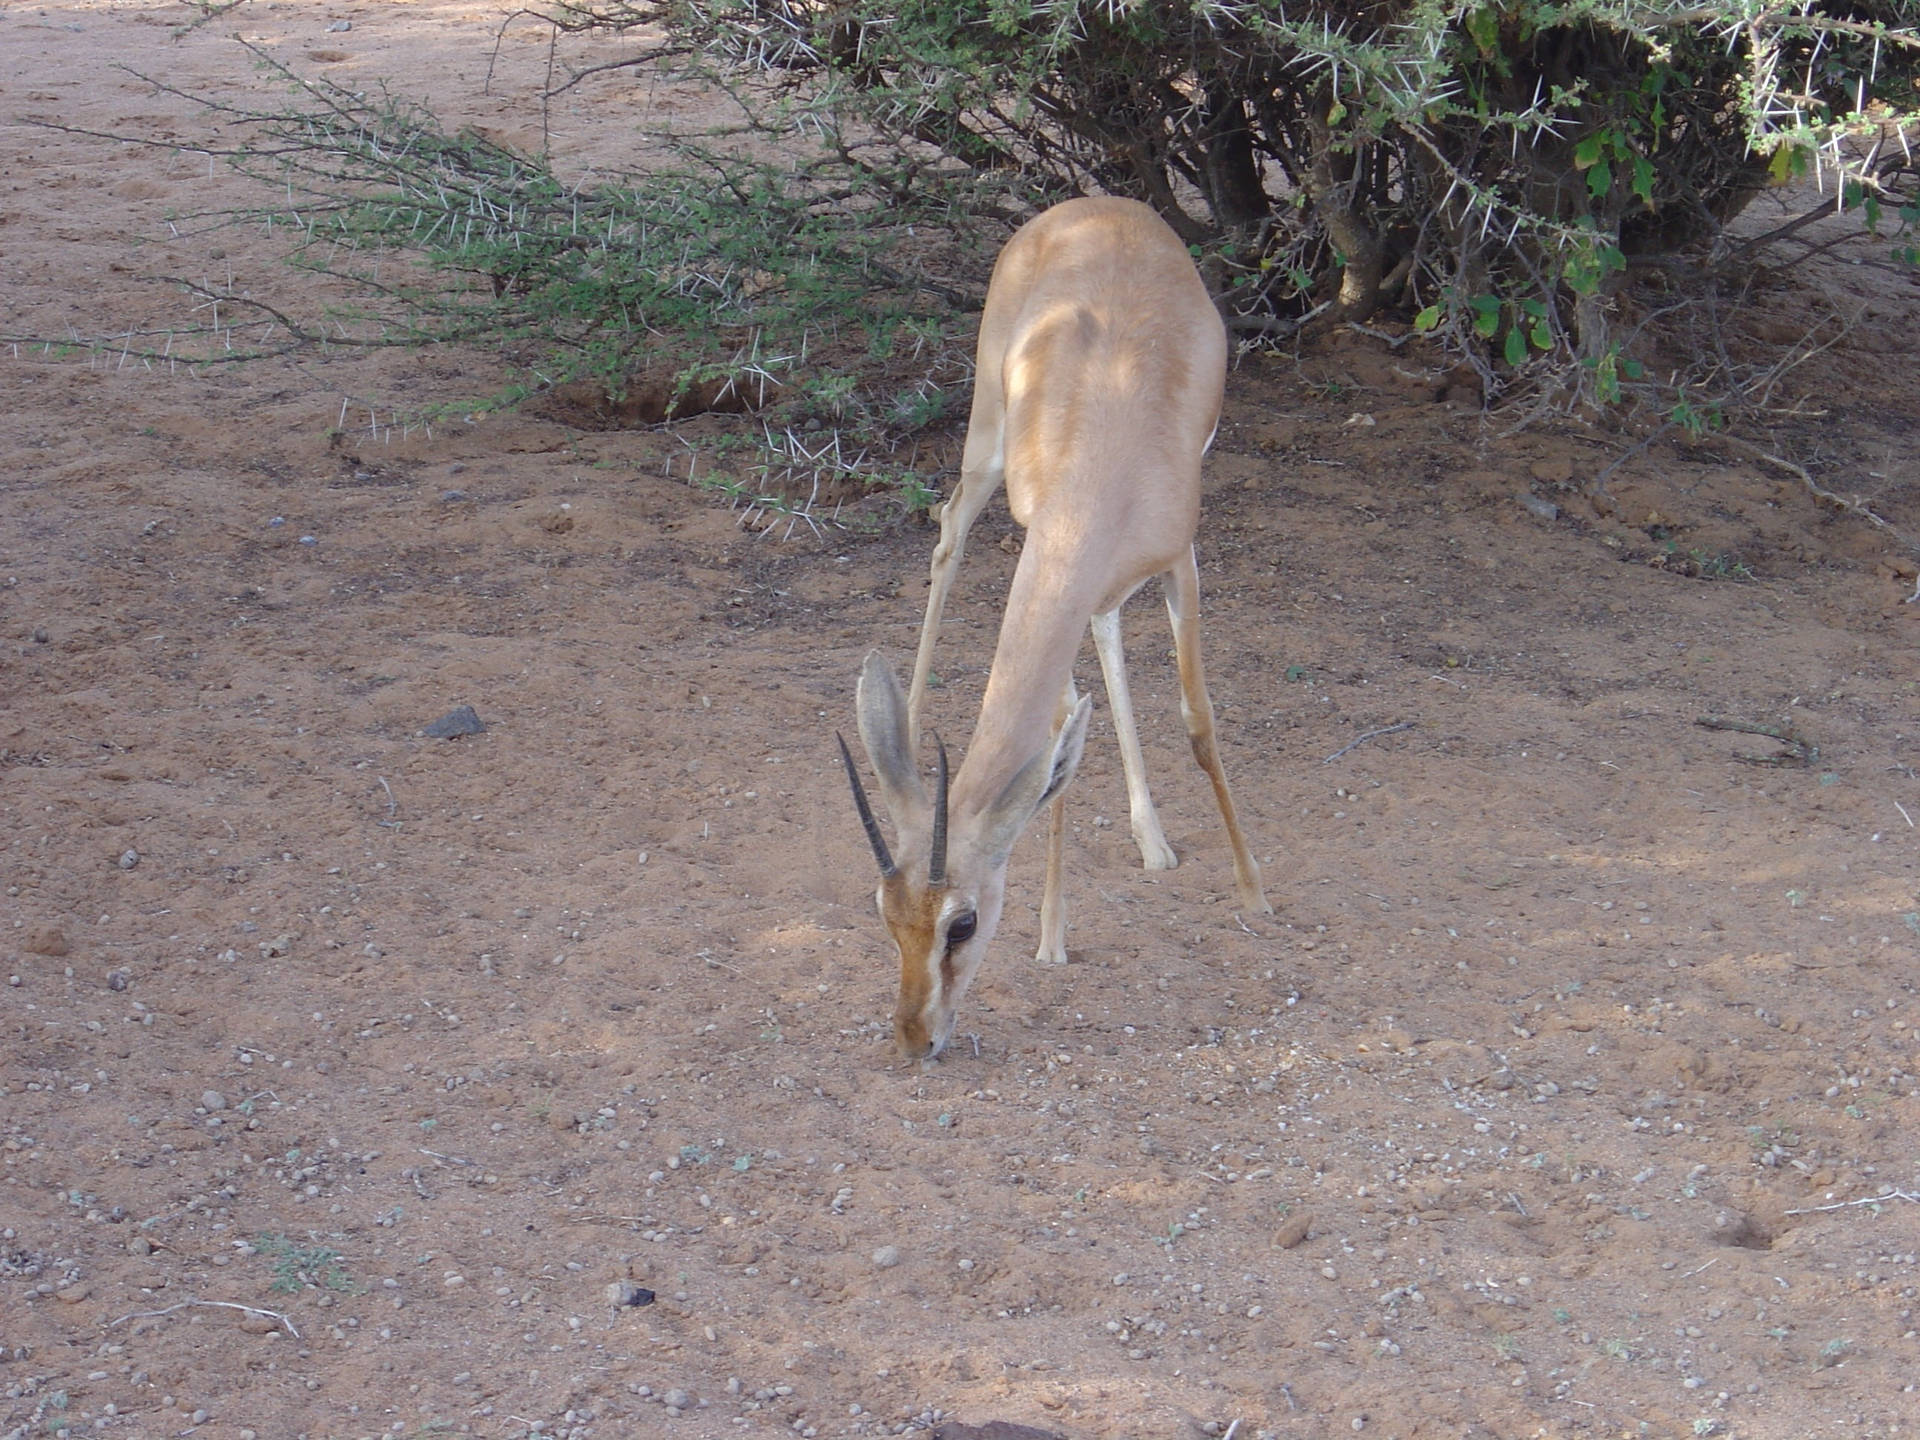 Djibouti Deer Would Be Translated To 